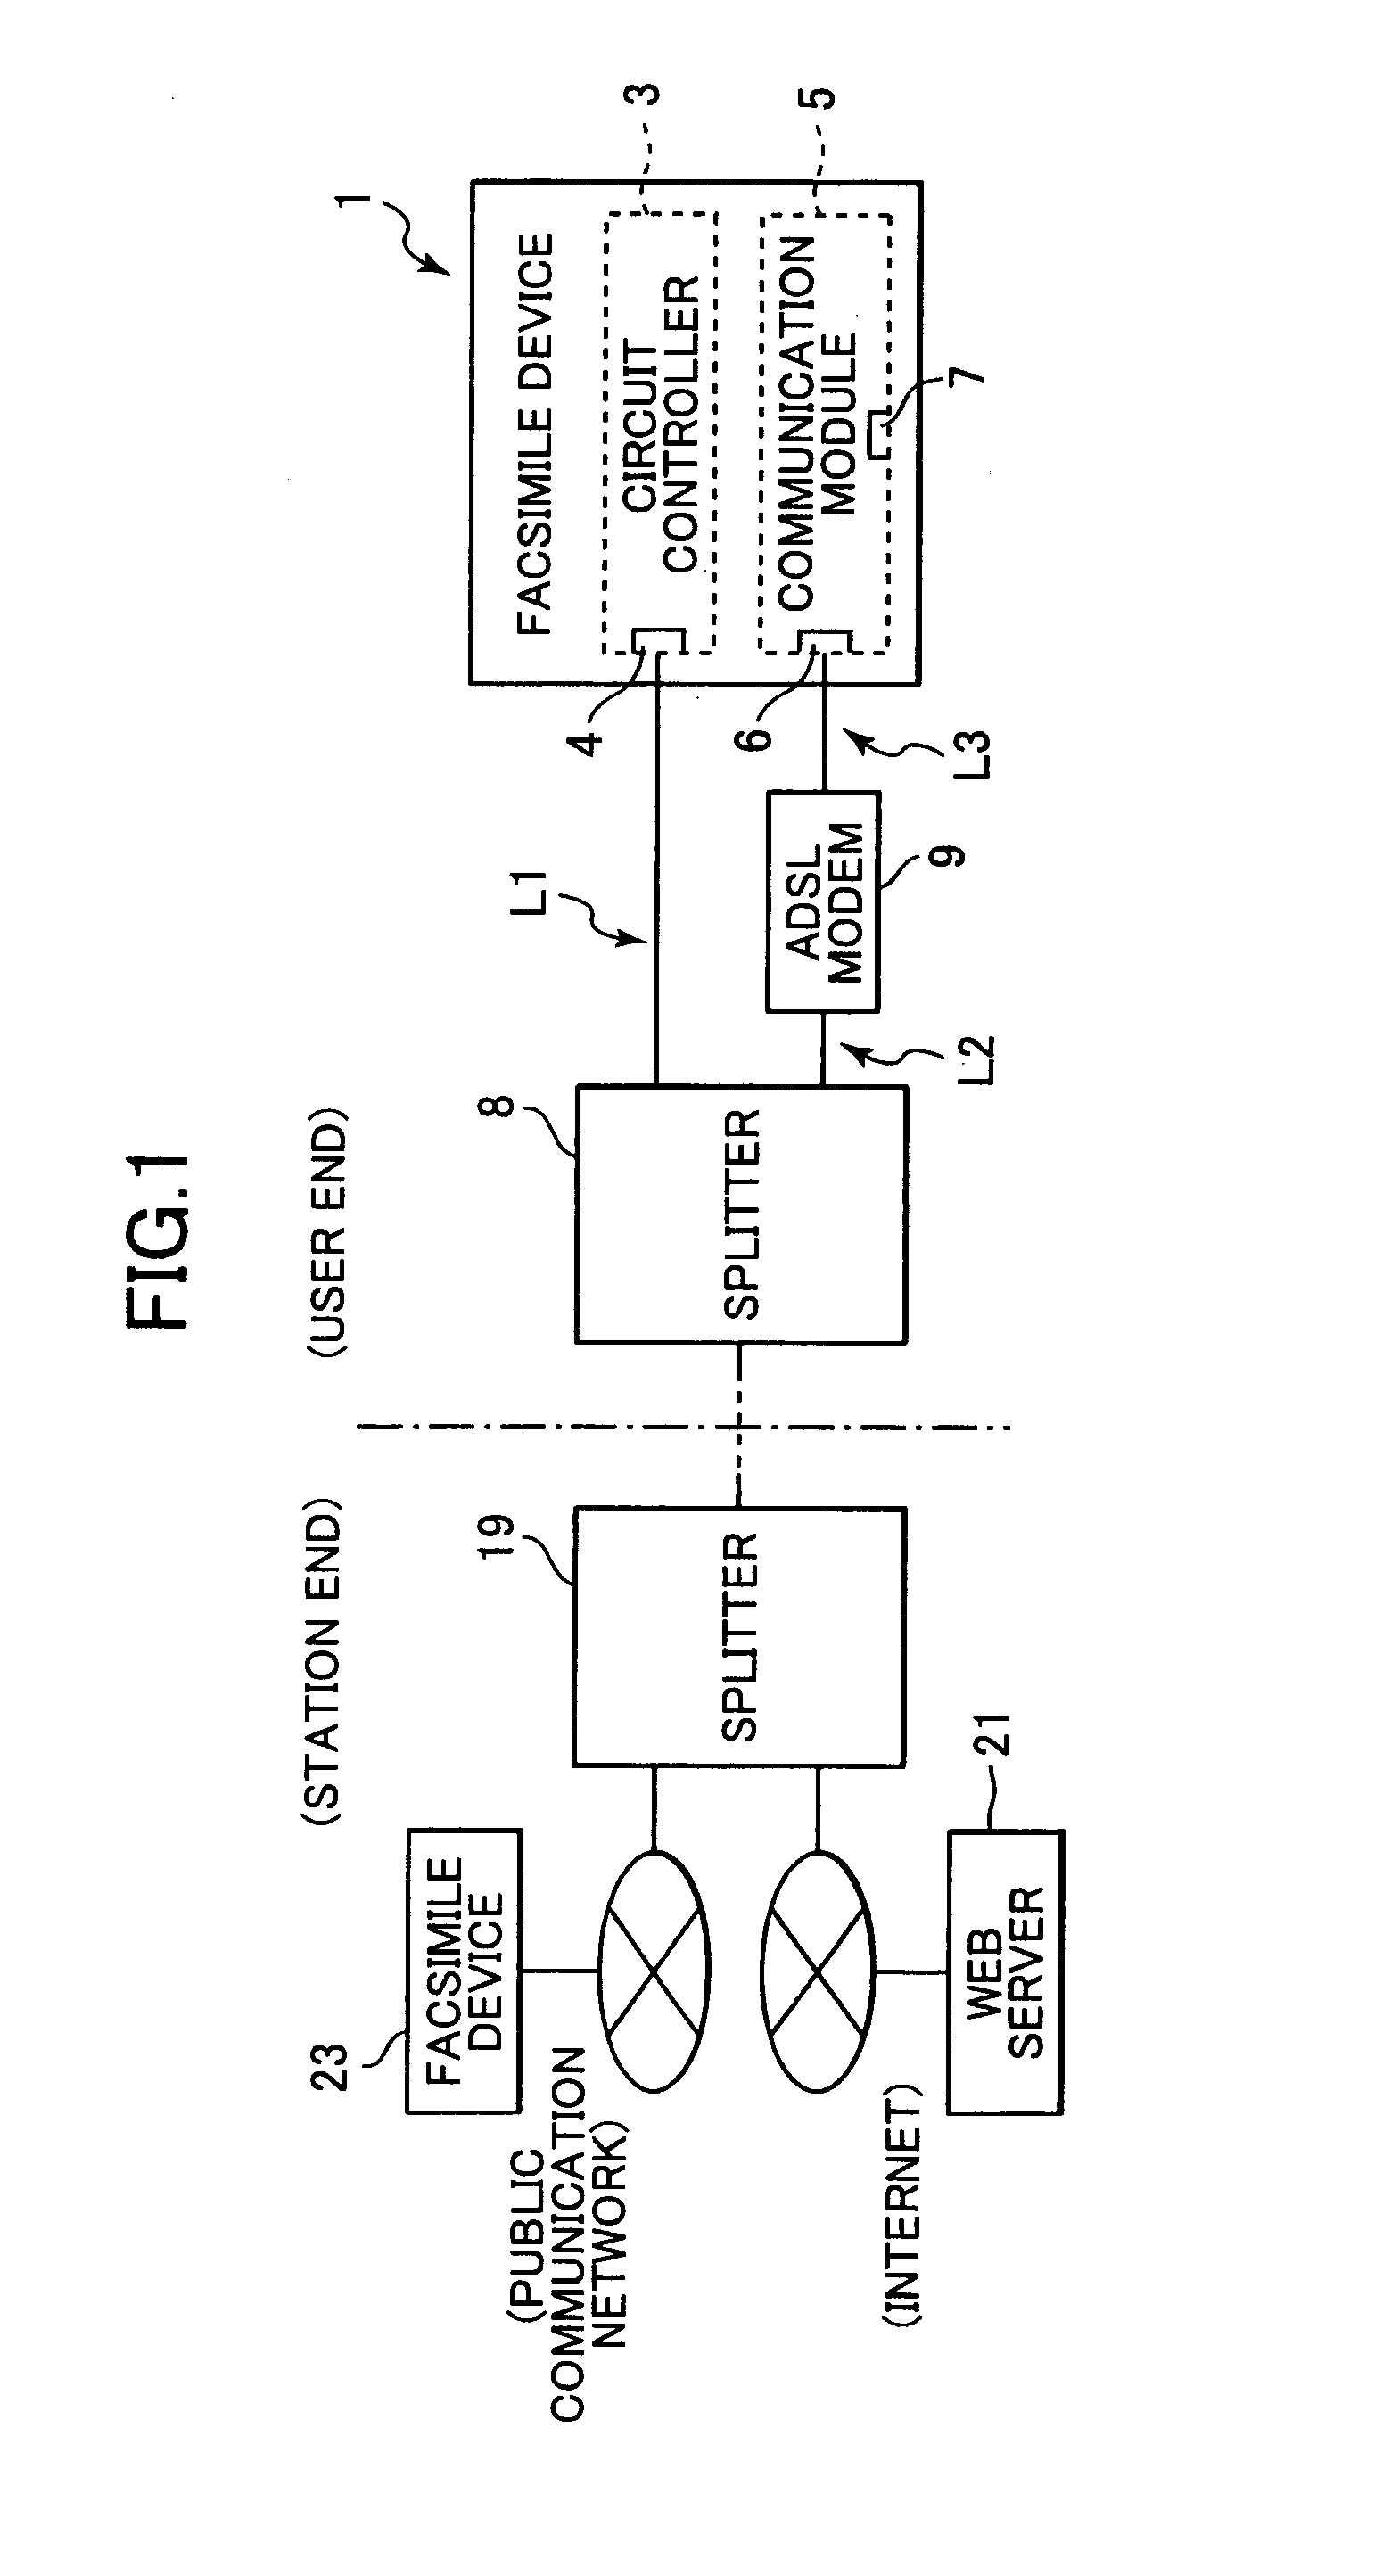 Image forming device that automatically updates shortcut key database when network data is received